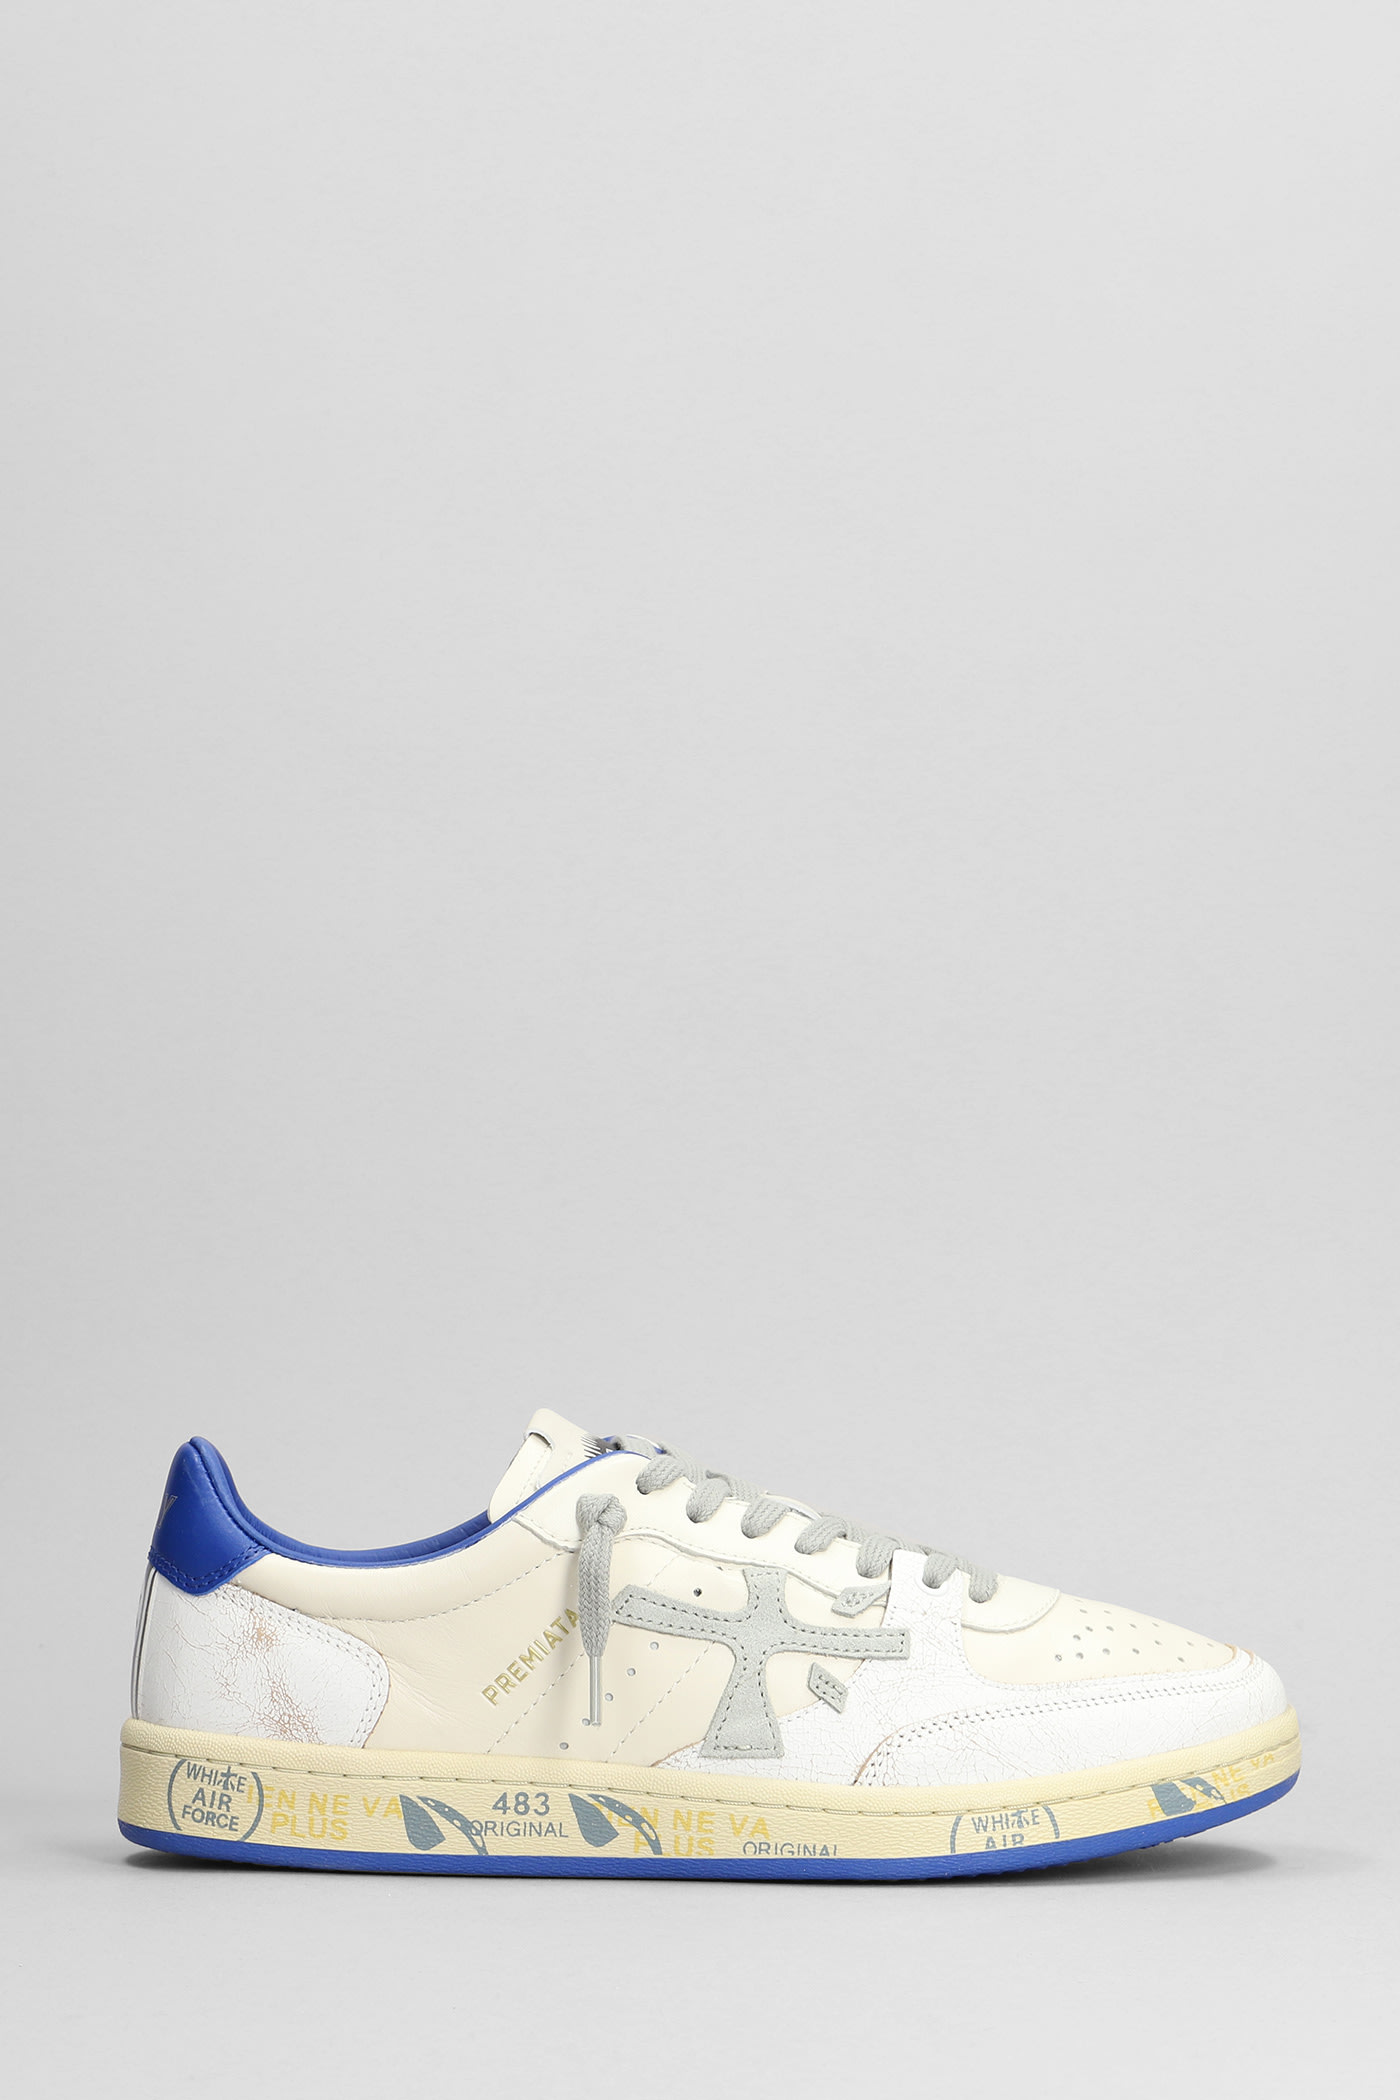 Shop Premiata Bskt Clay Sneakers In White Leather